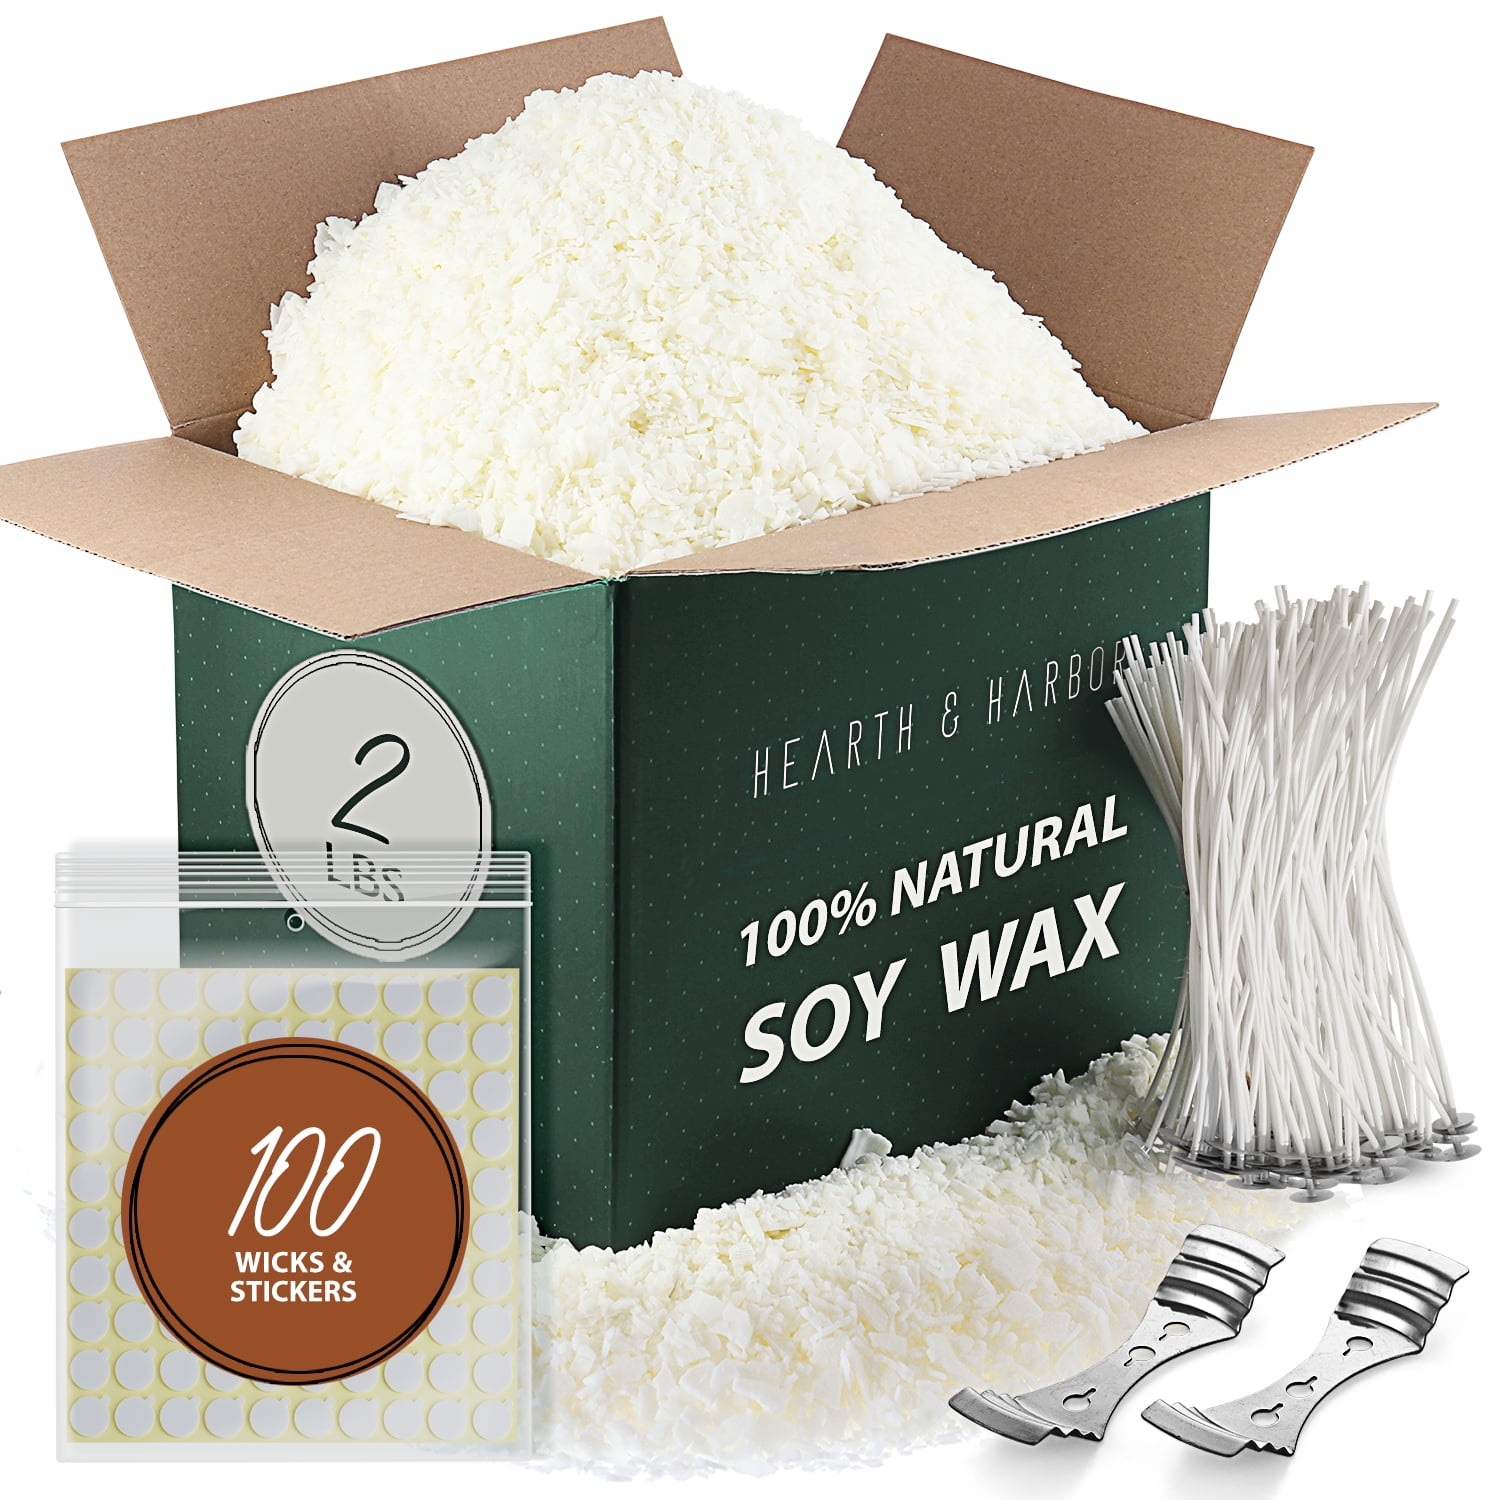 1KG 100% Pure Soy Wax/Soya Candle Making Wax Natural Flakes Clean